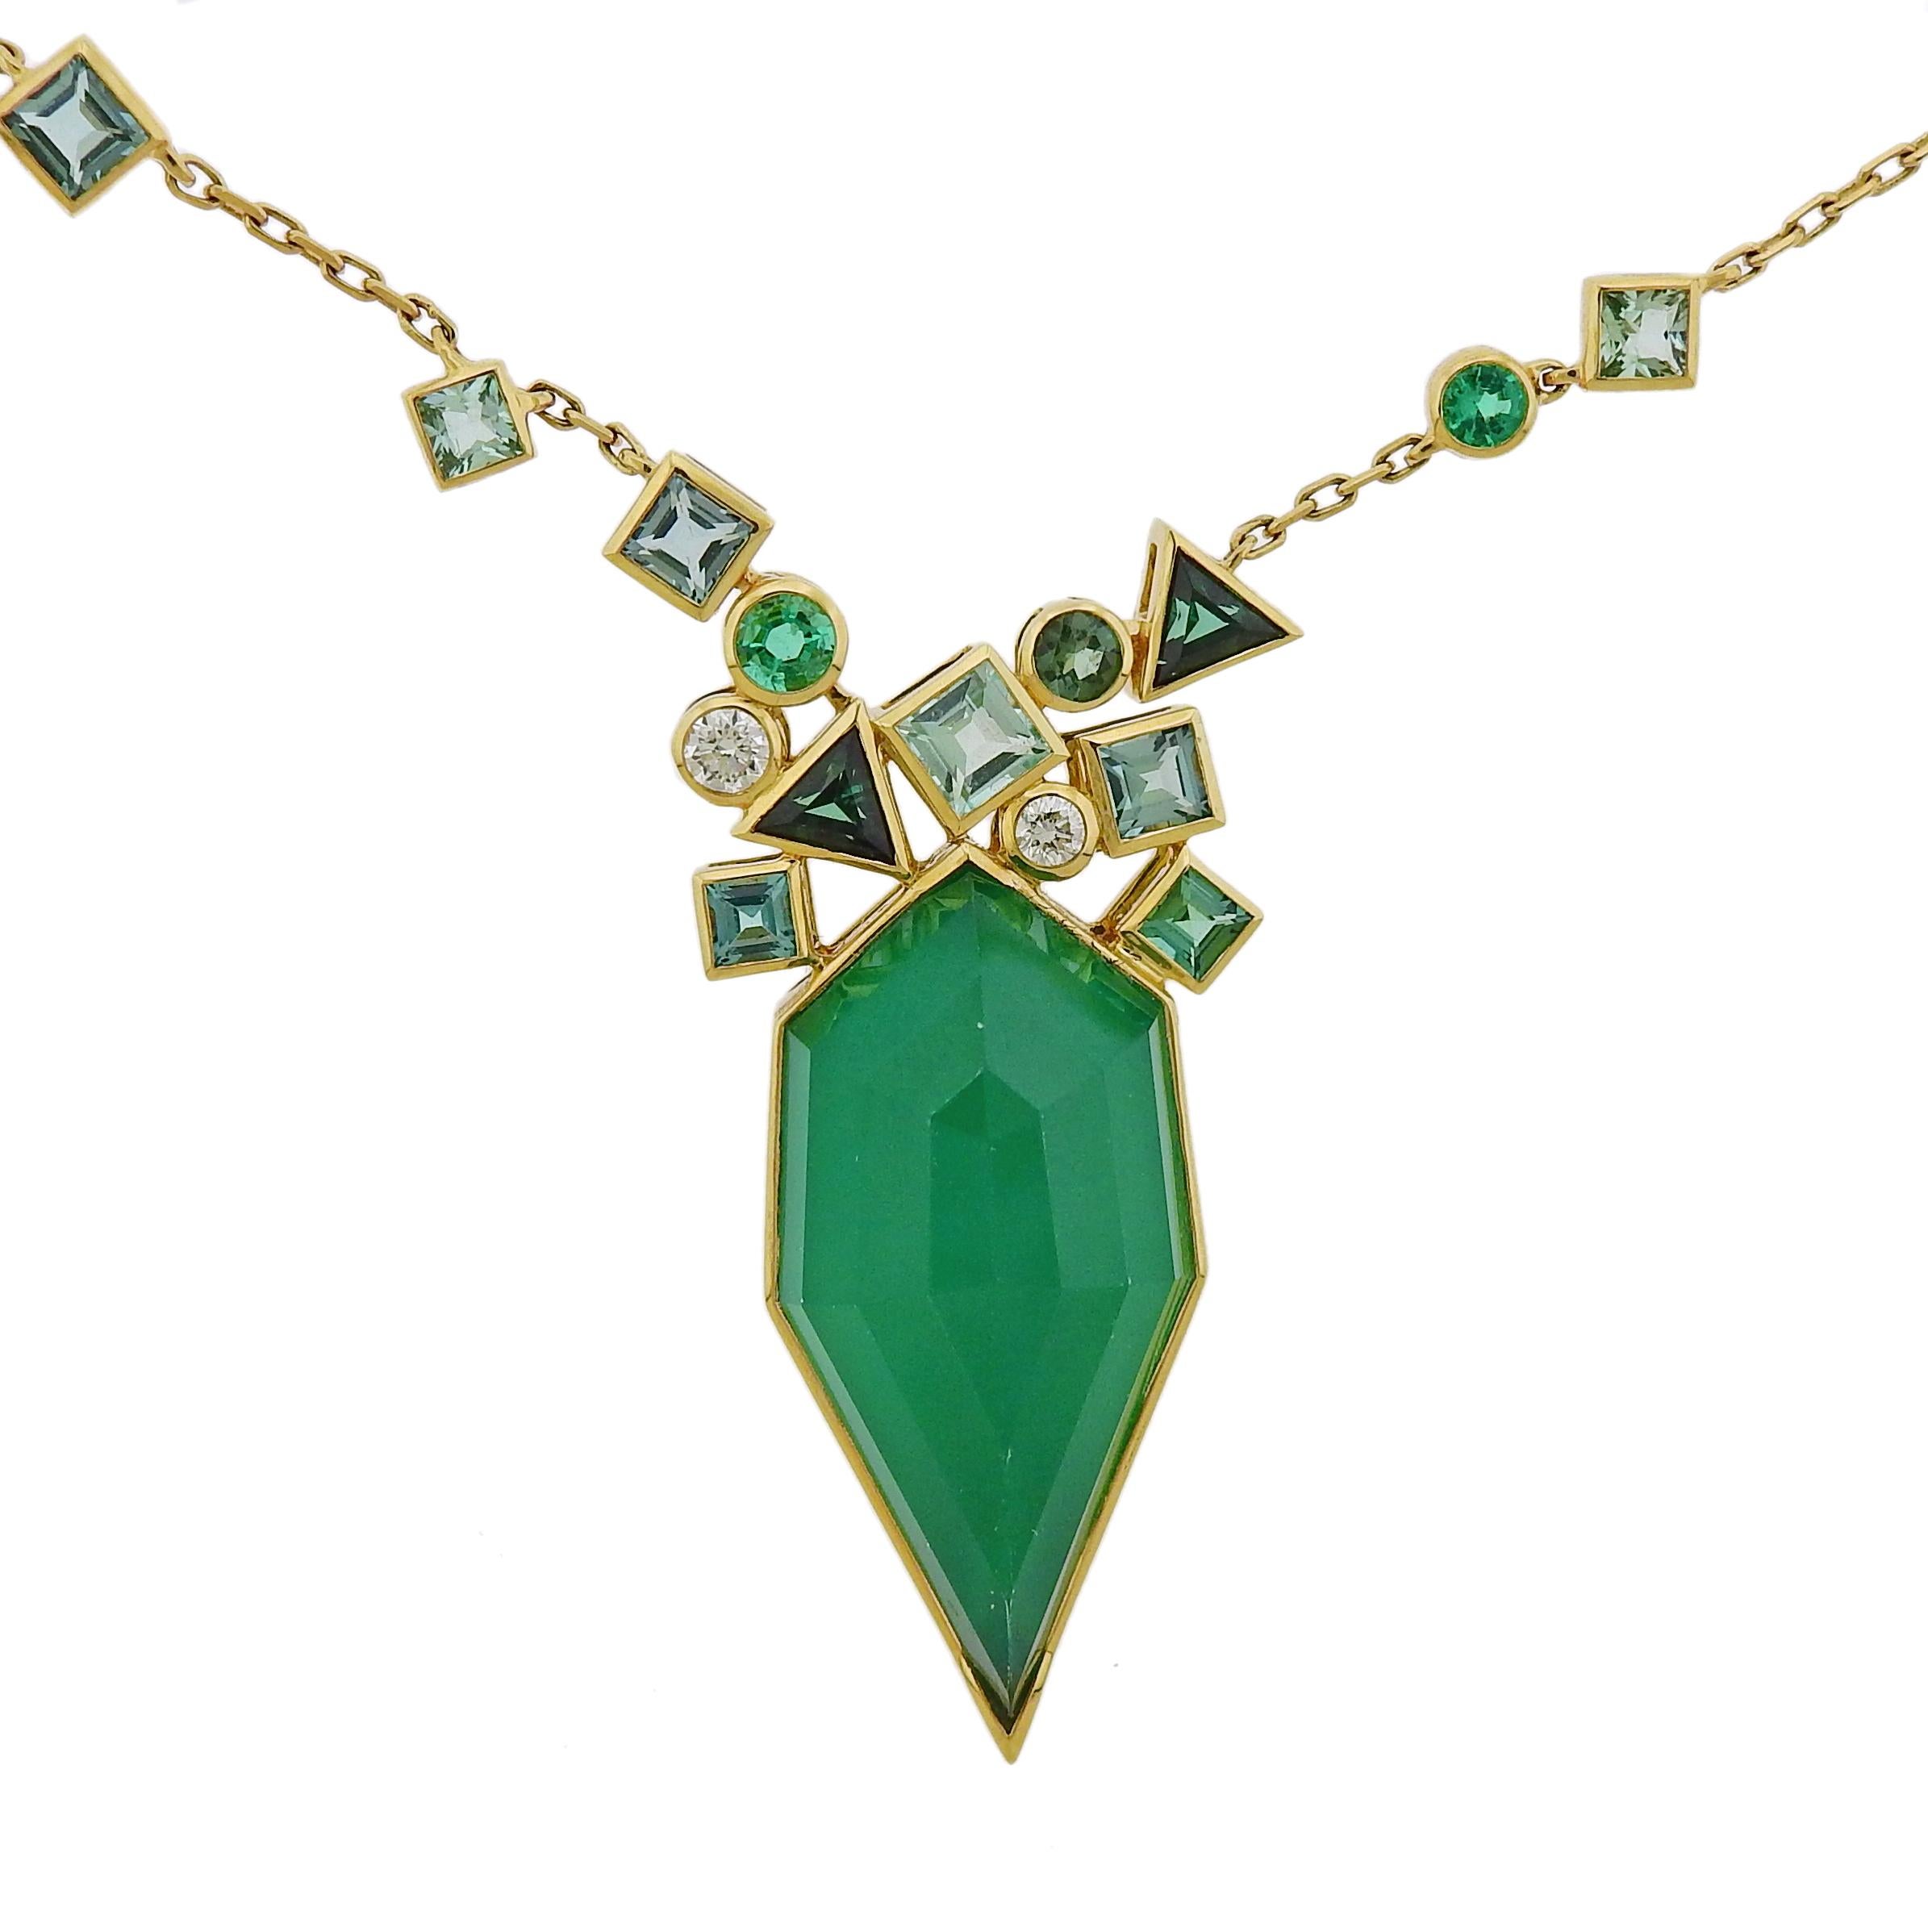 Brand new 18k gold Gold Struck pendant necklace by Stephen Webster, featuring green agate, emerald, approx. 0.17ct diamond and  tourmalines. Retail $13000. Comes with original packaging. Necklace is 30